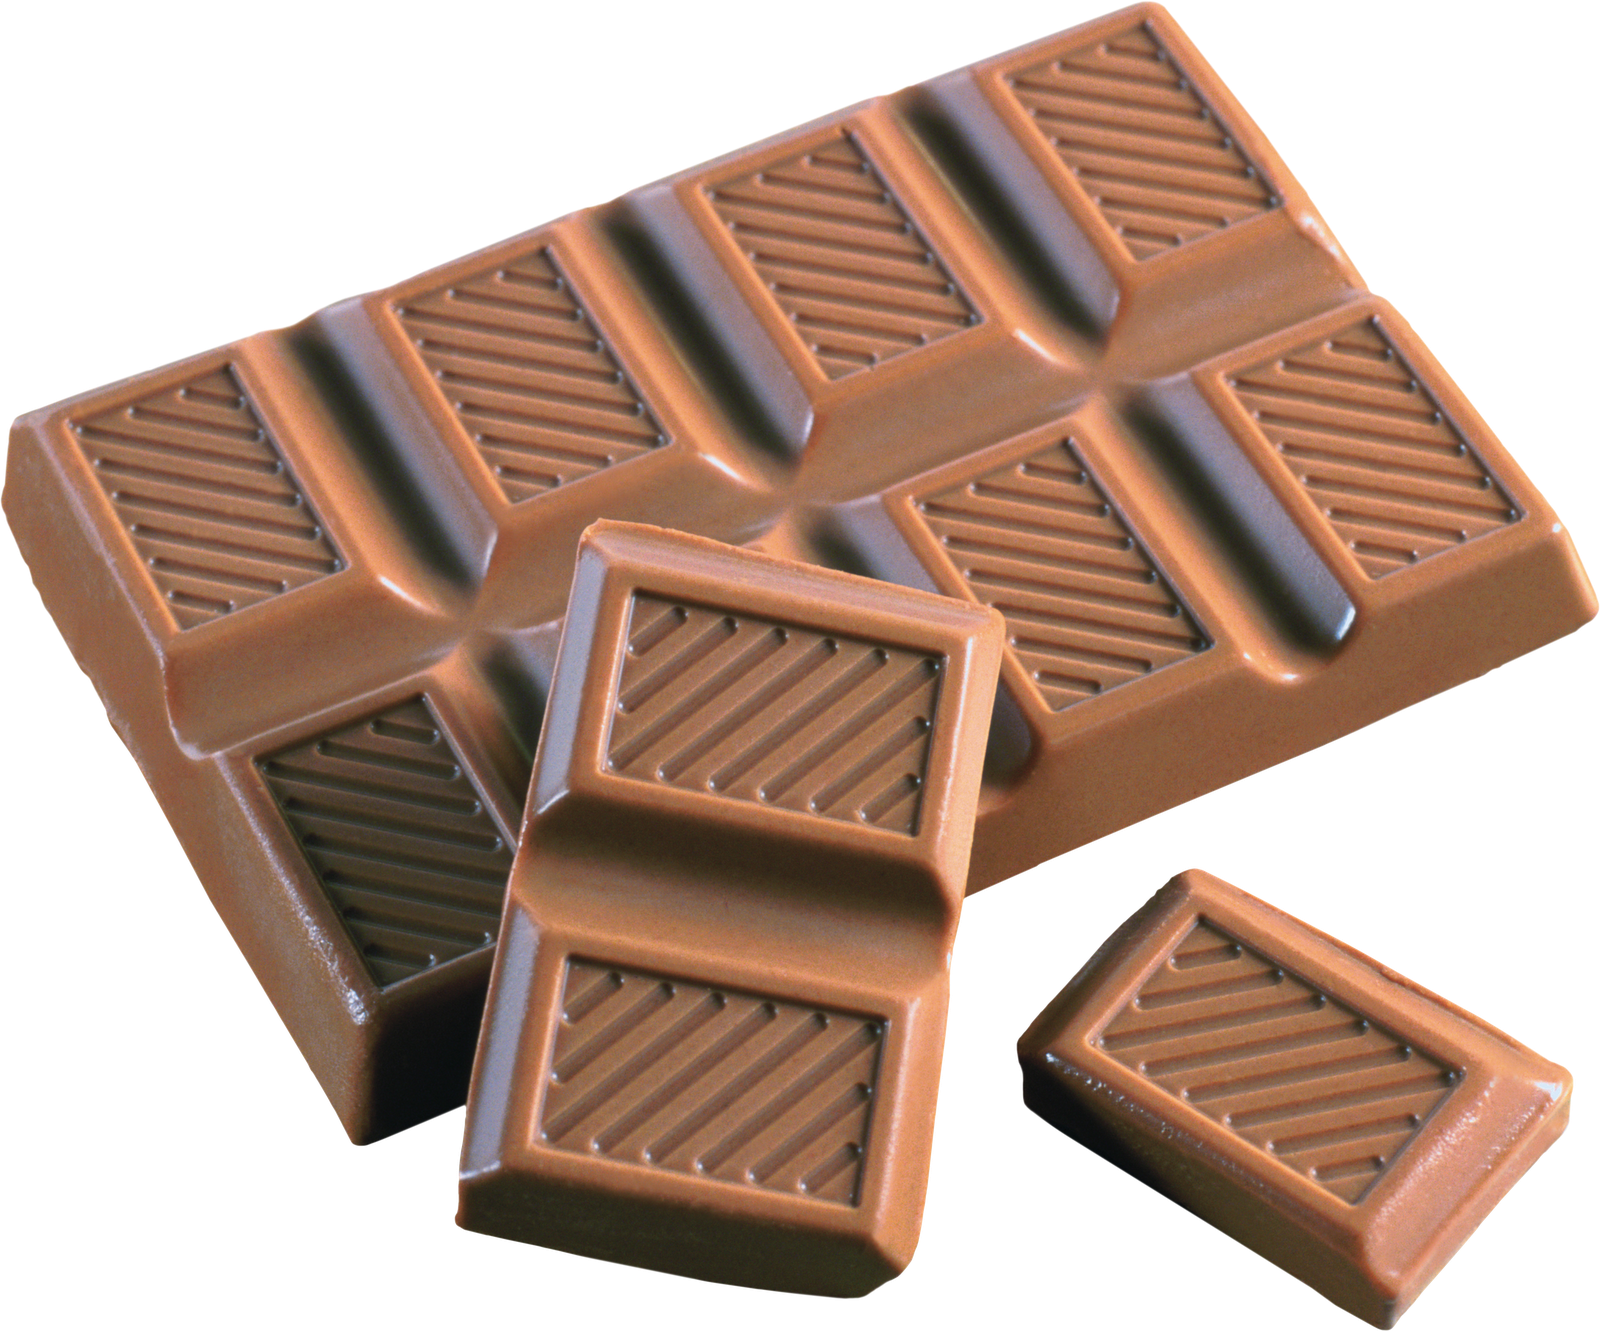 Free Chocolate Clipart Pictures Clipartix